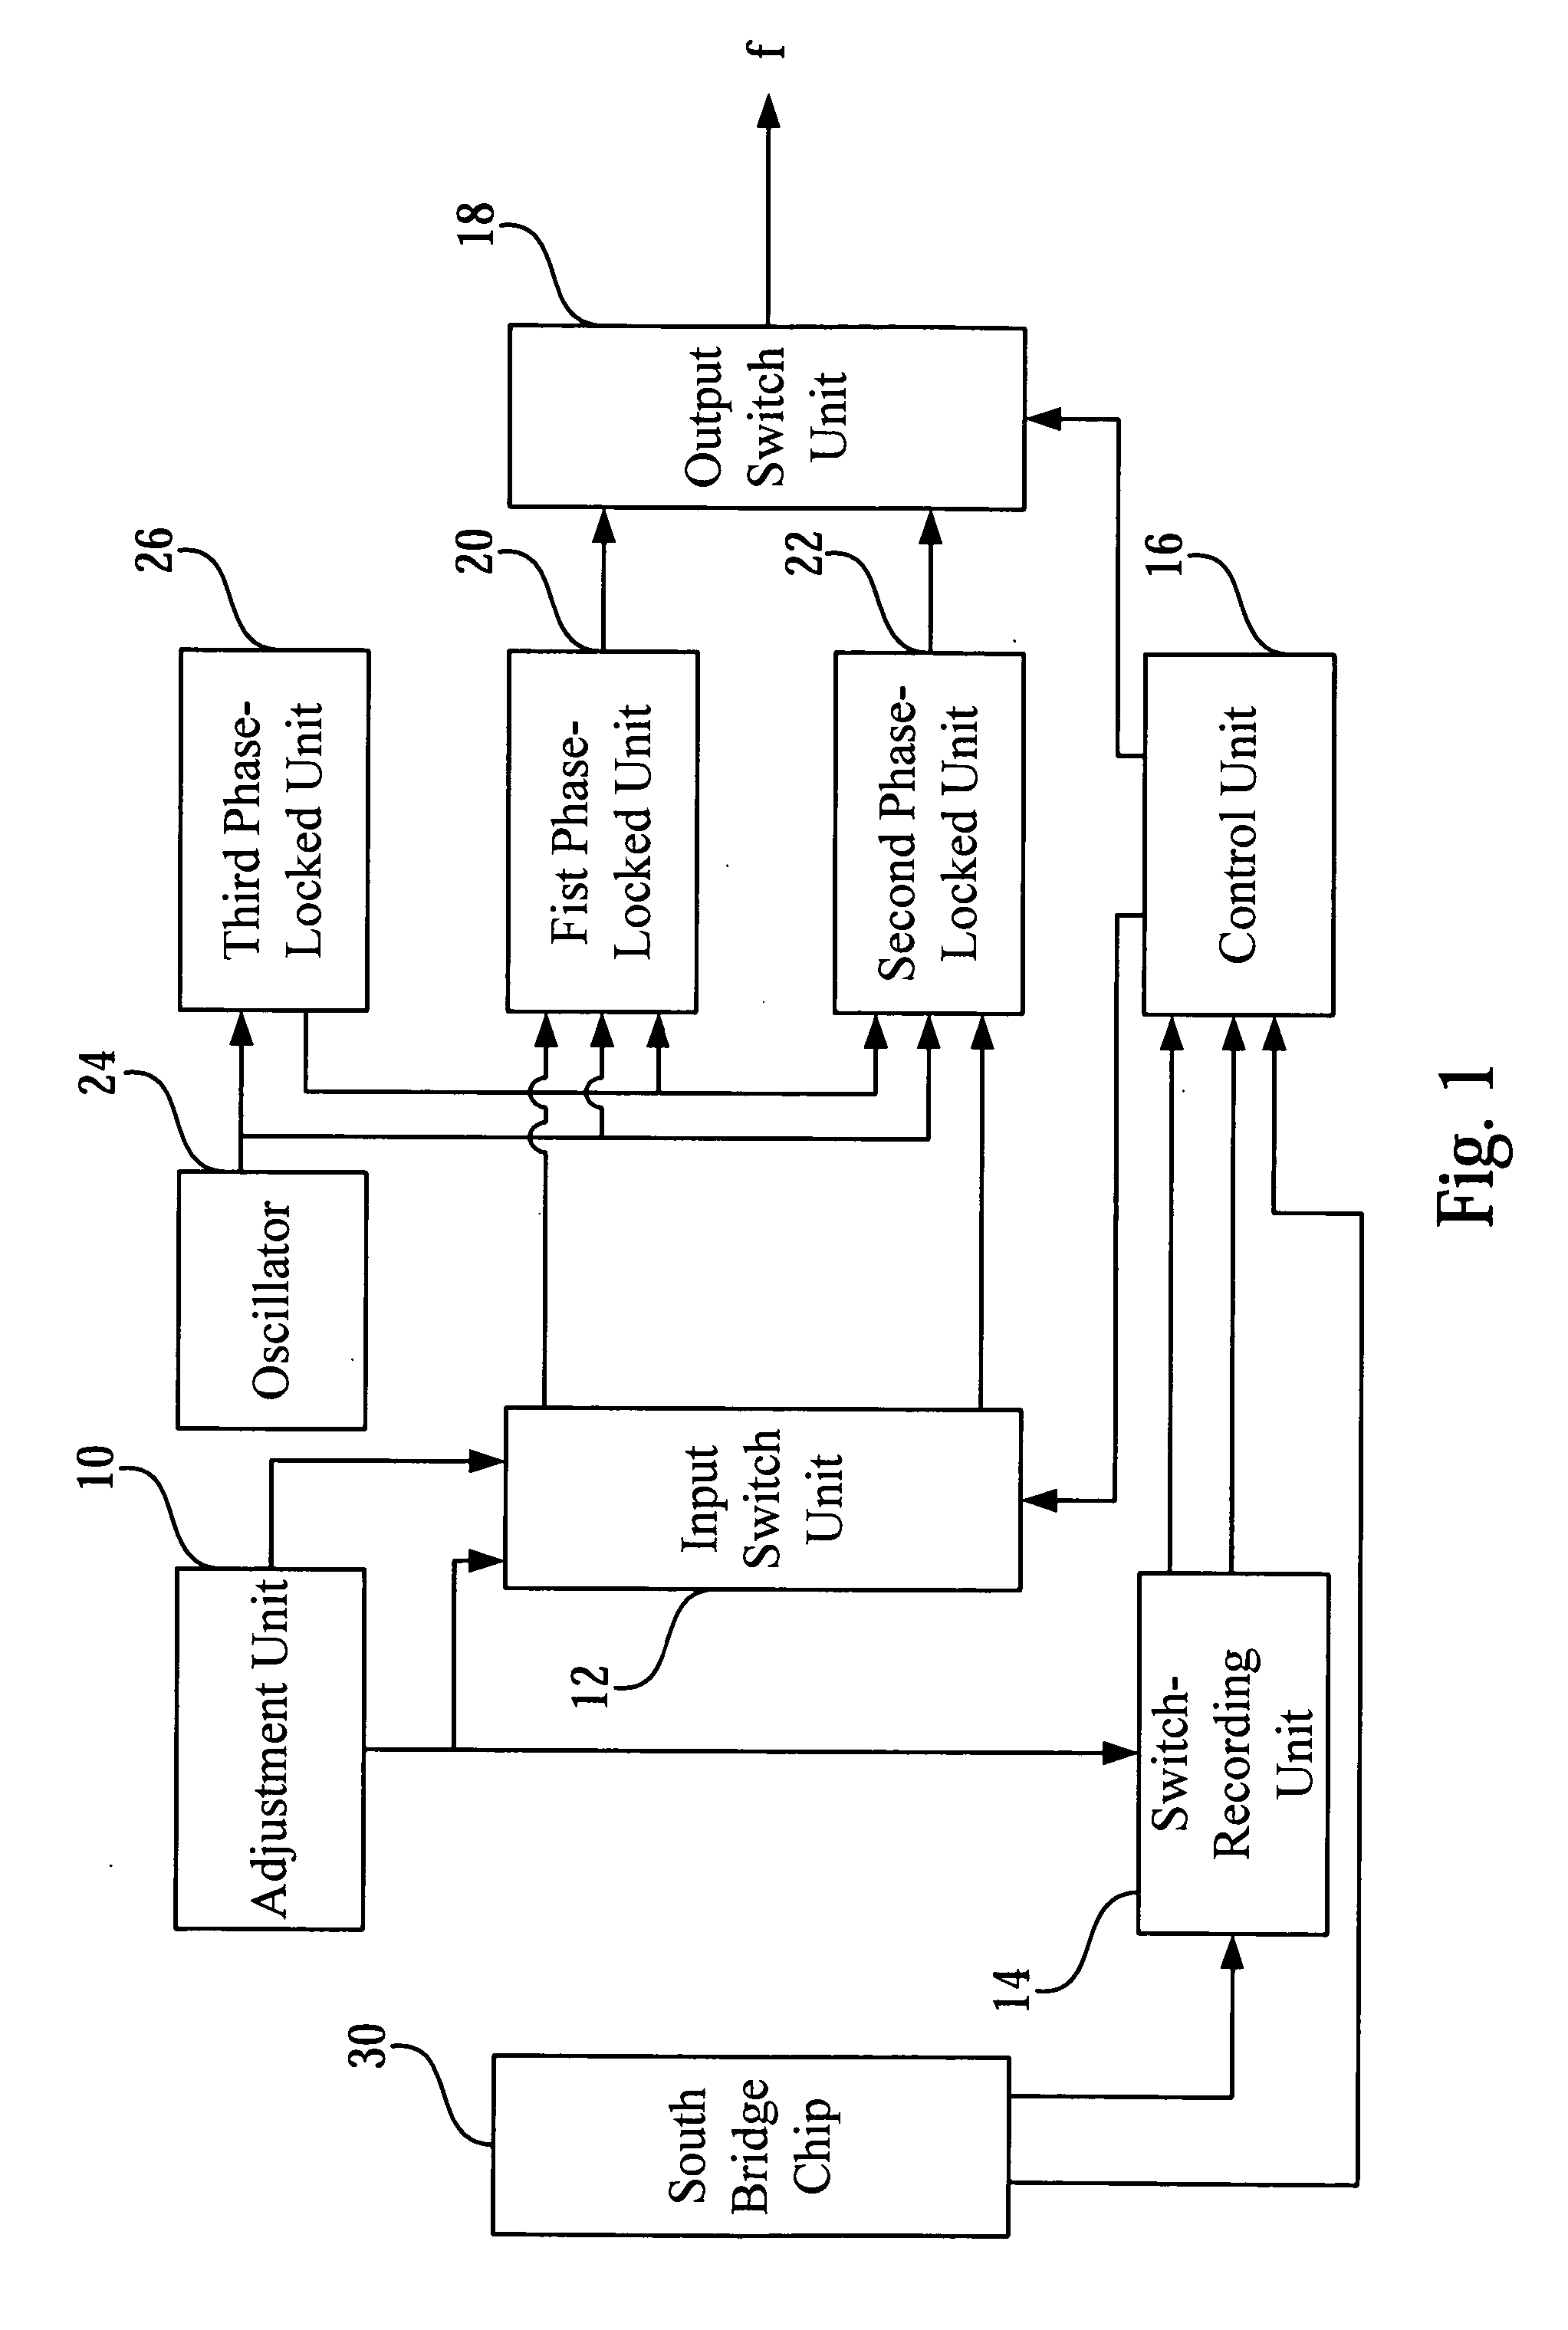 Switching circuit and method thereof for dynamically switching host clock signals